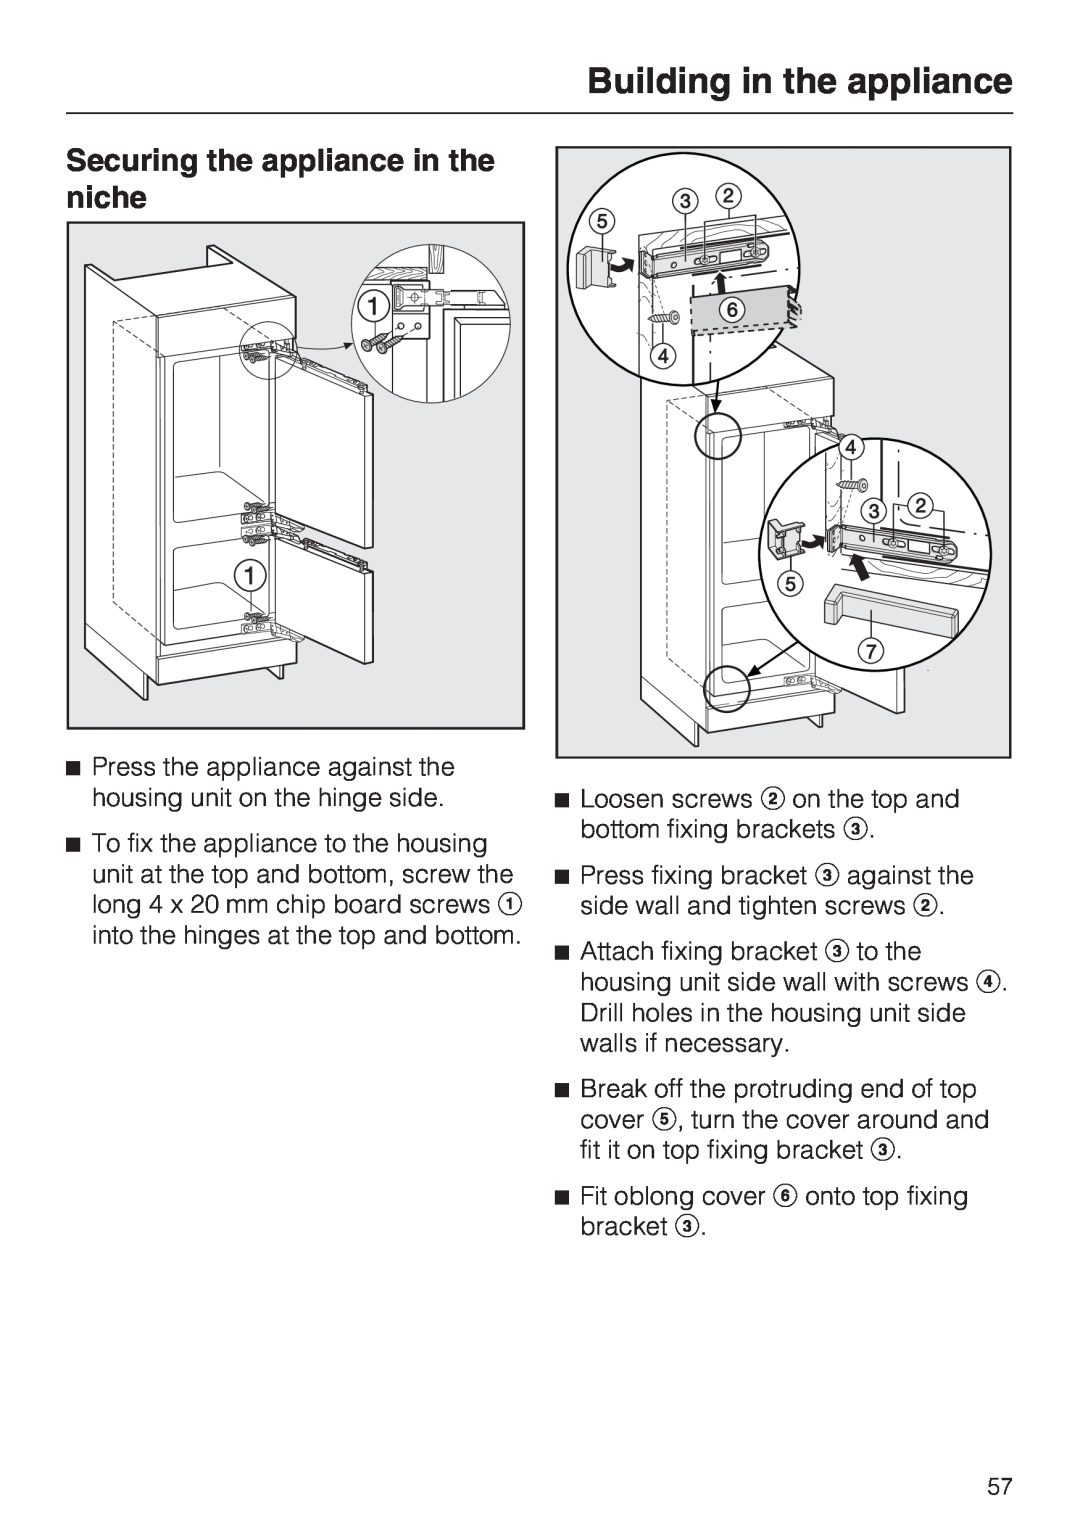 Miele KF 9757 ID installation instructions Securing the appliance in the niche, Building in the appliance 